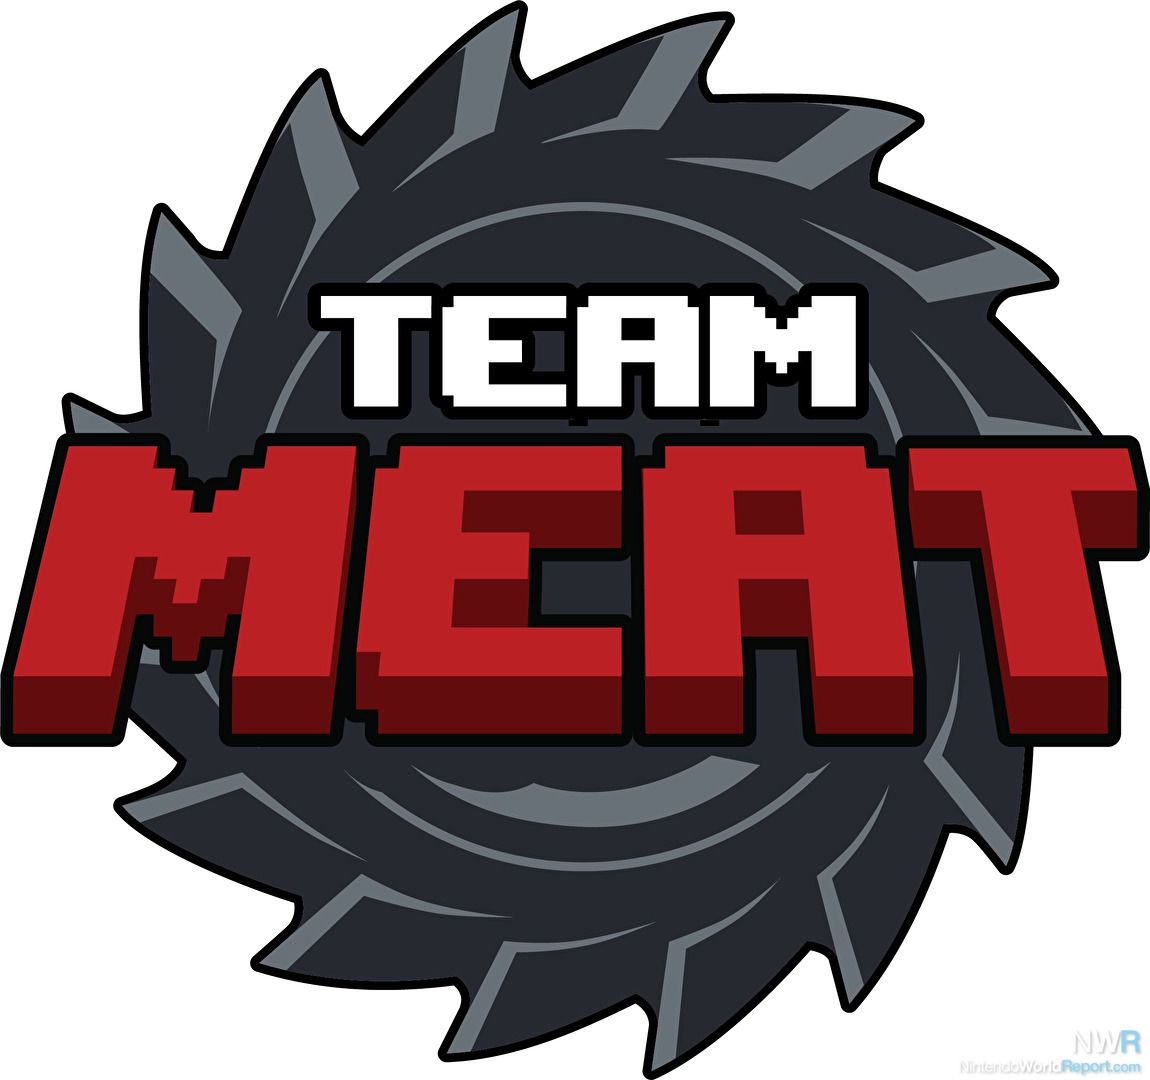 Meat gaming. Team meat. Super meat boy. Meat Team мясо. Мит бобра тим.